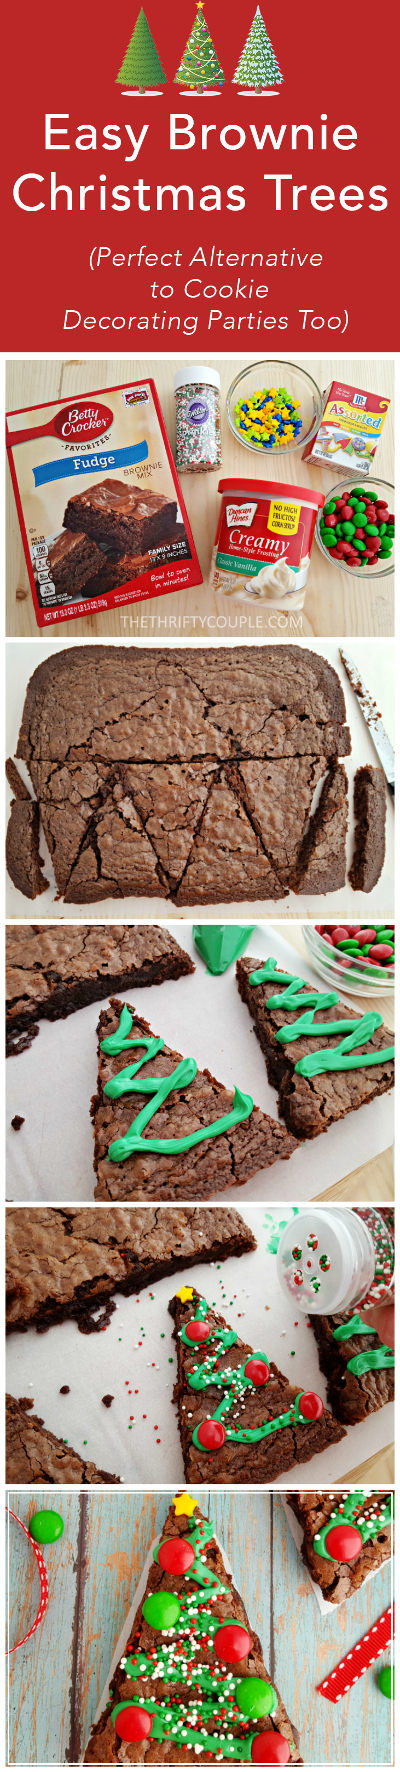 brownie-christmas-tree-directions-collage